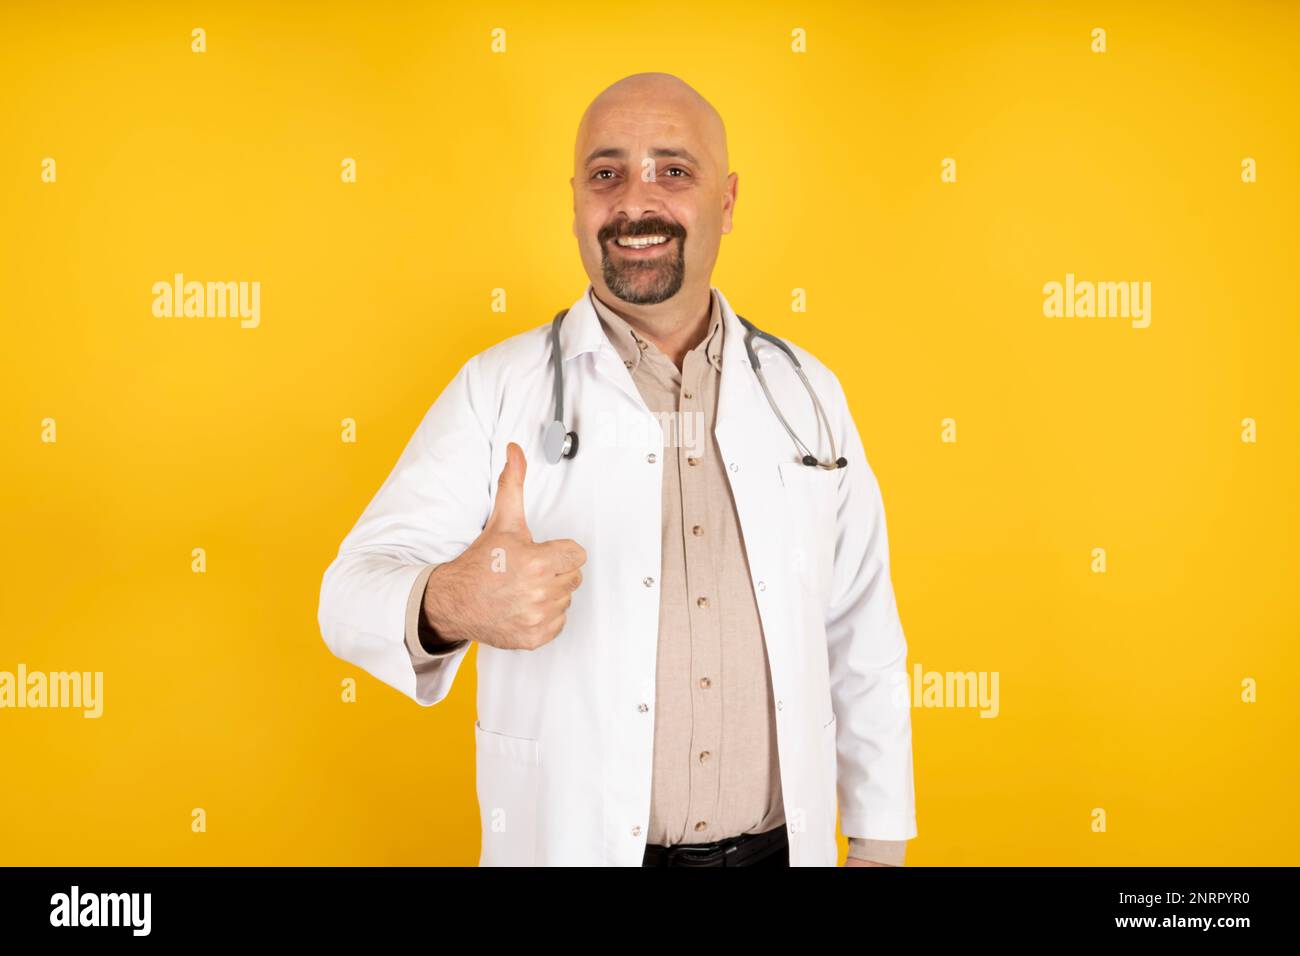 Portrait of caucasian male doctor showing thumb up gesture. Standing over warm orange studio background. Successful treatment concept idea. Copy space Stock Photo